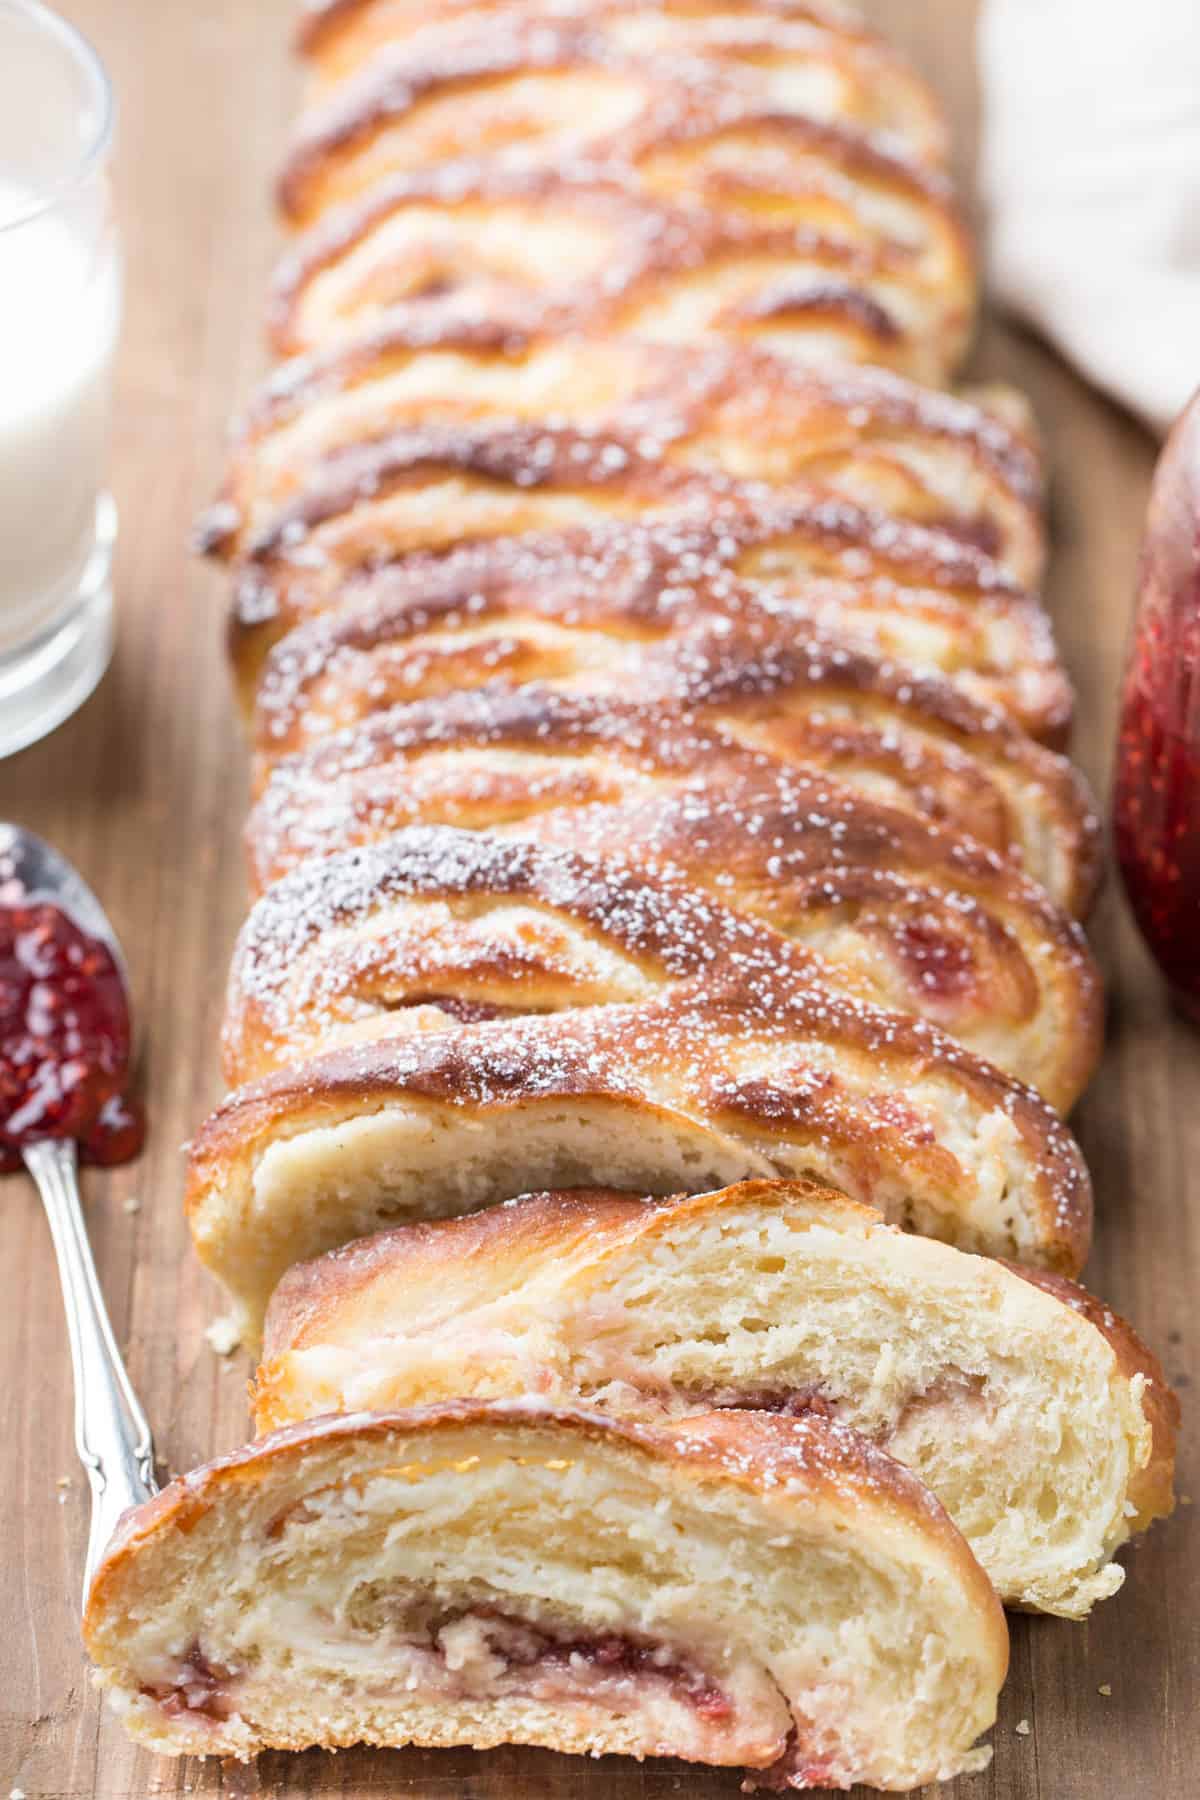 Sweet bread recipe filled with jam and a cream cheese mixture.